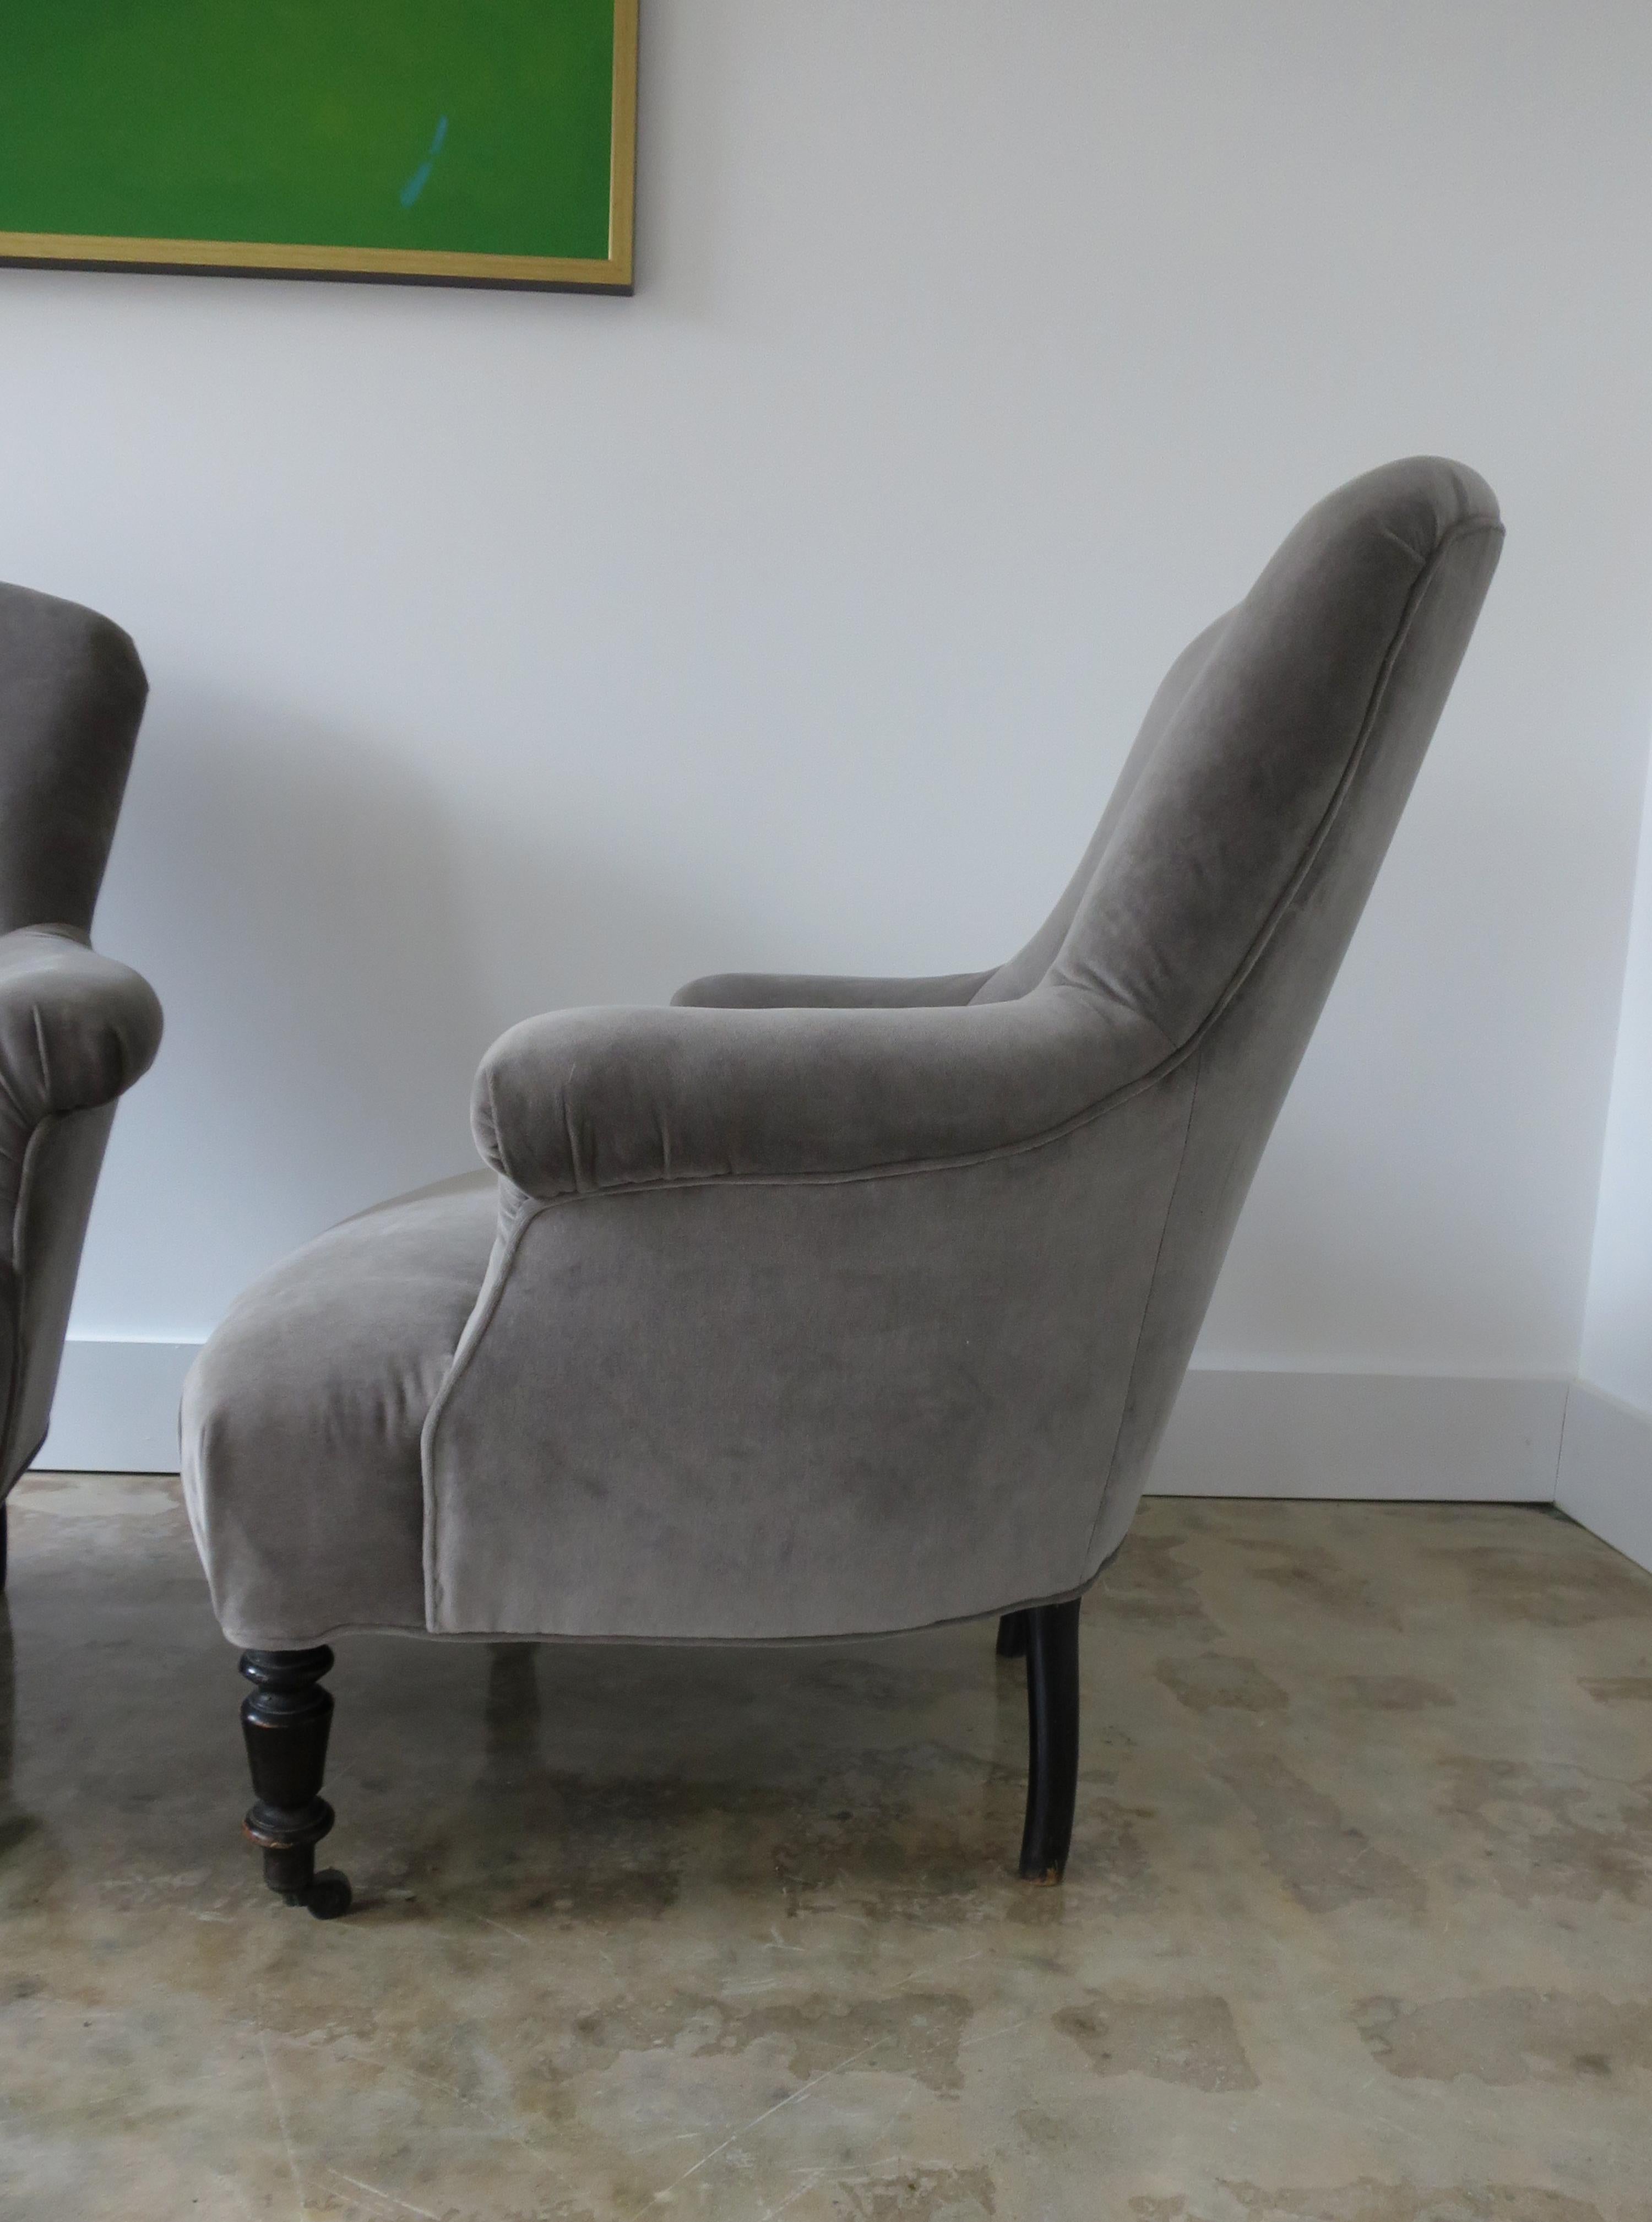 Late 19th century pair of Napoleon III armchairs completely redone, glued, reupholstered in sophisticated grey velvet. All important original blackened legs with original casters.